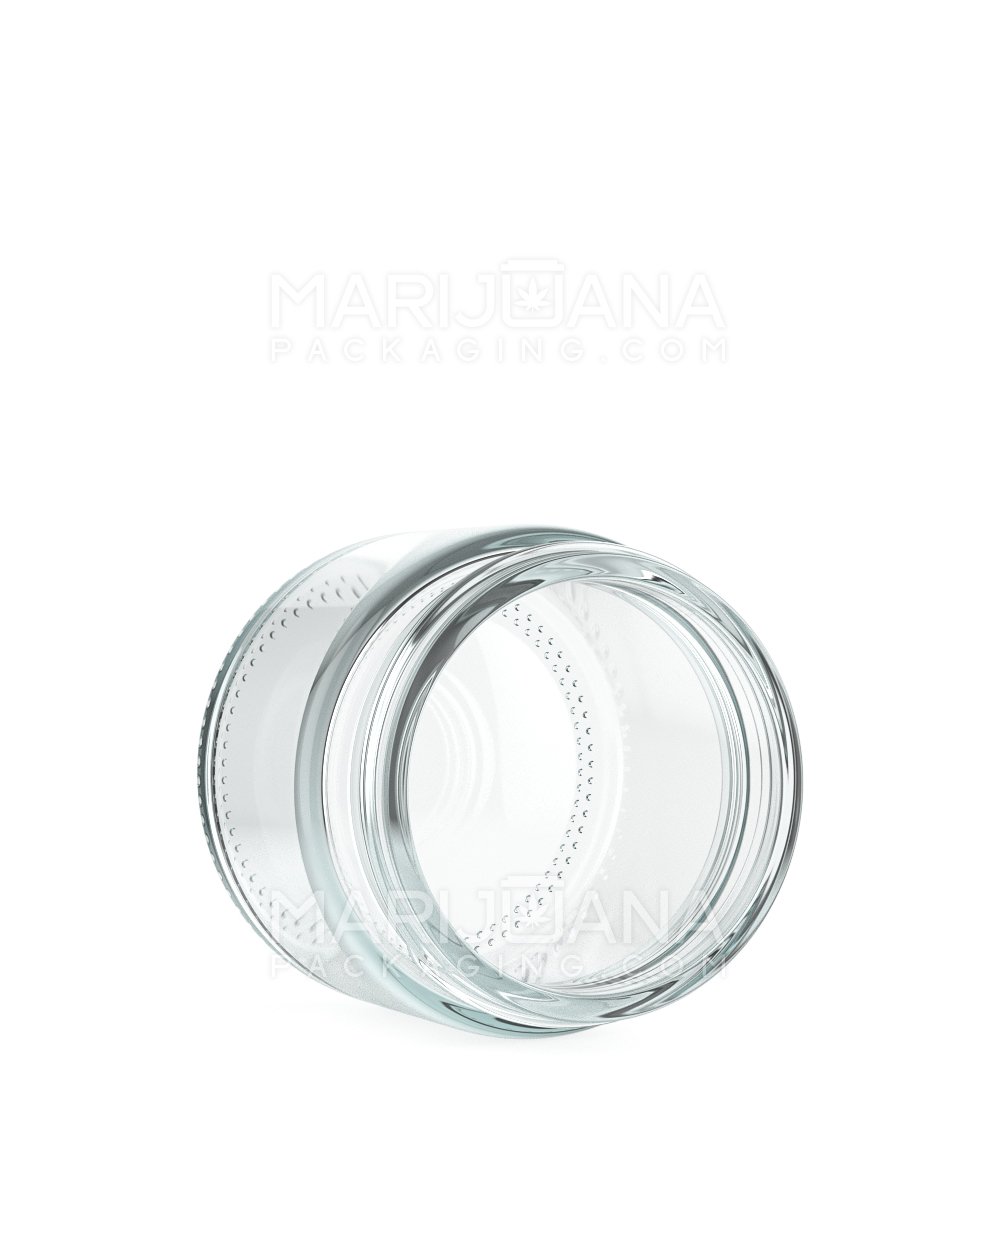 Straight Sided Clear Glass Jars | 50mm - 2oz - 200 Count - 3